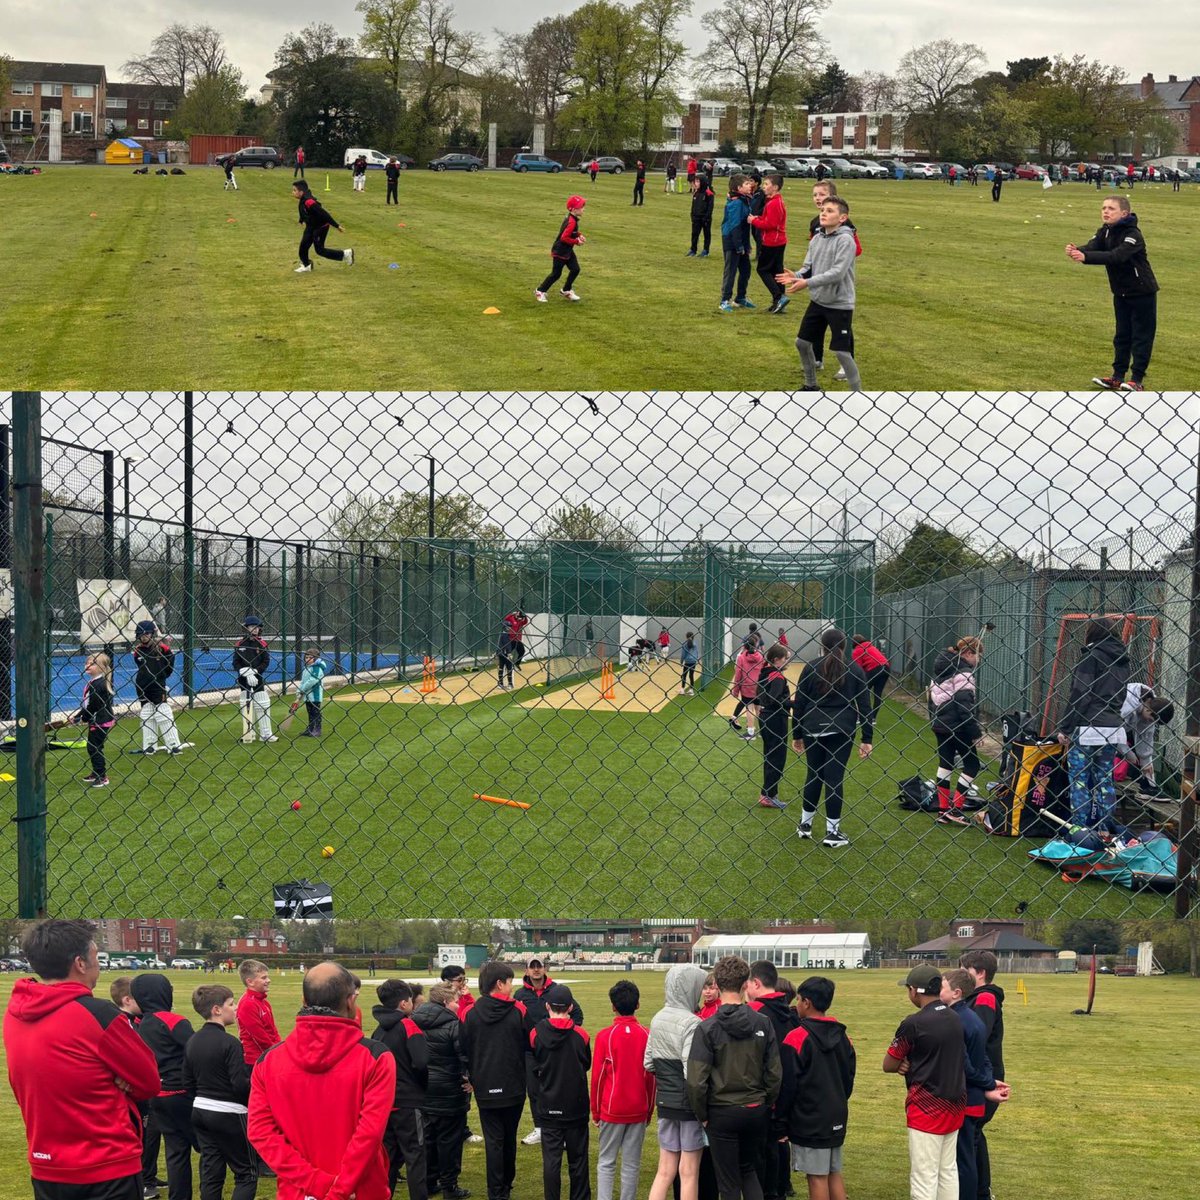 Junior cricket is off and running for the summer! We’re finally starting to beat the weather as the young cherries got outside for the first session of the summer 🍒